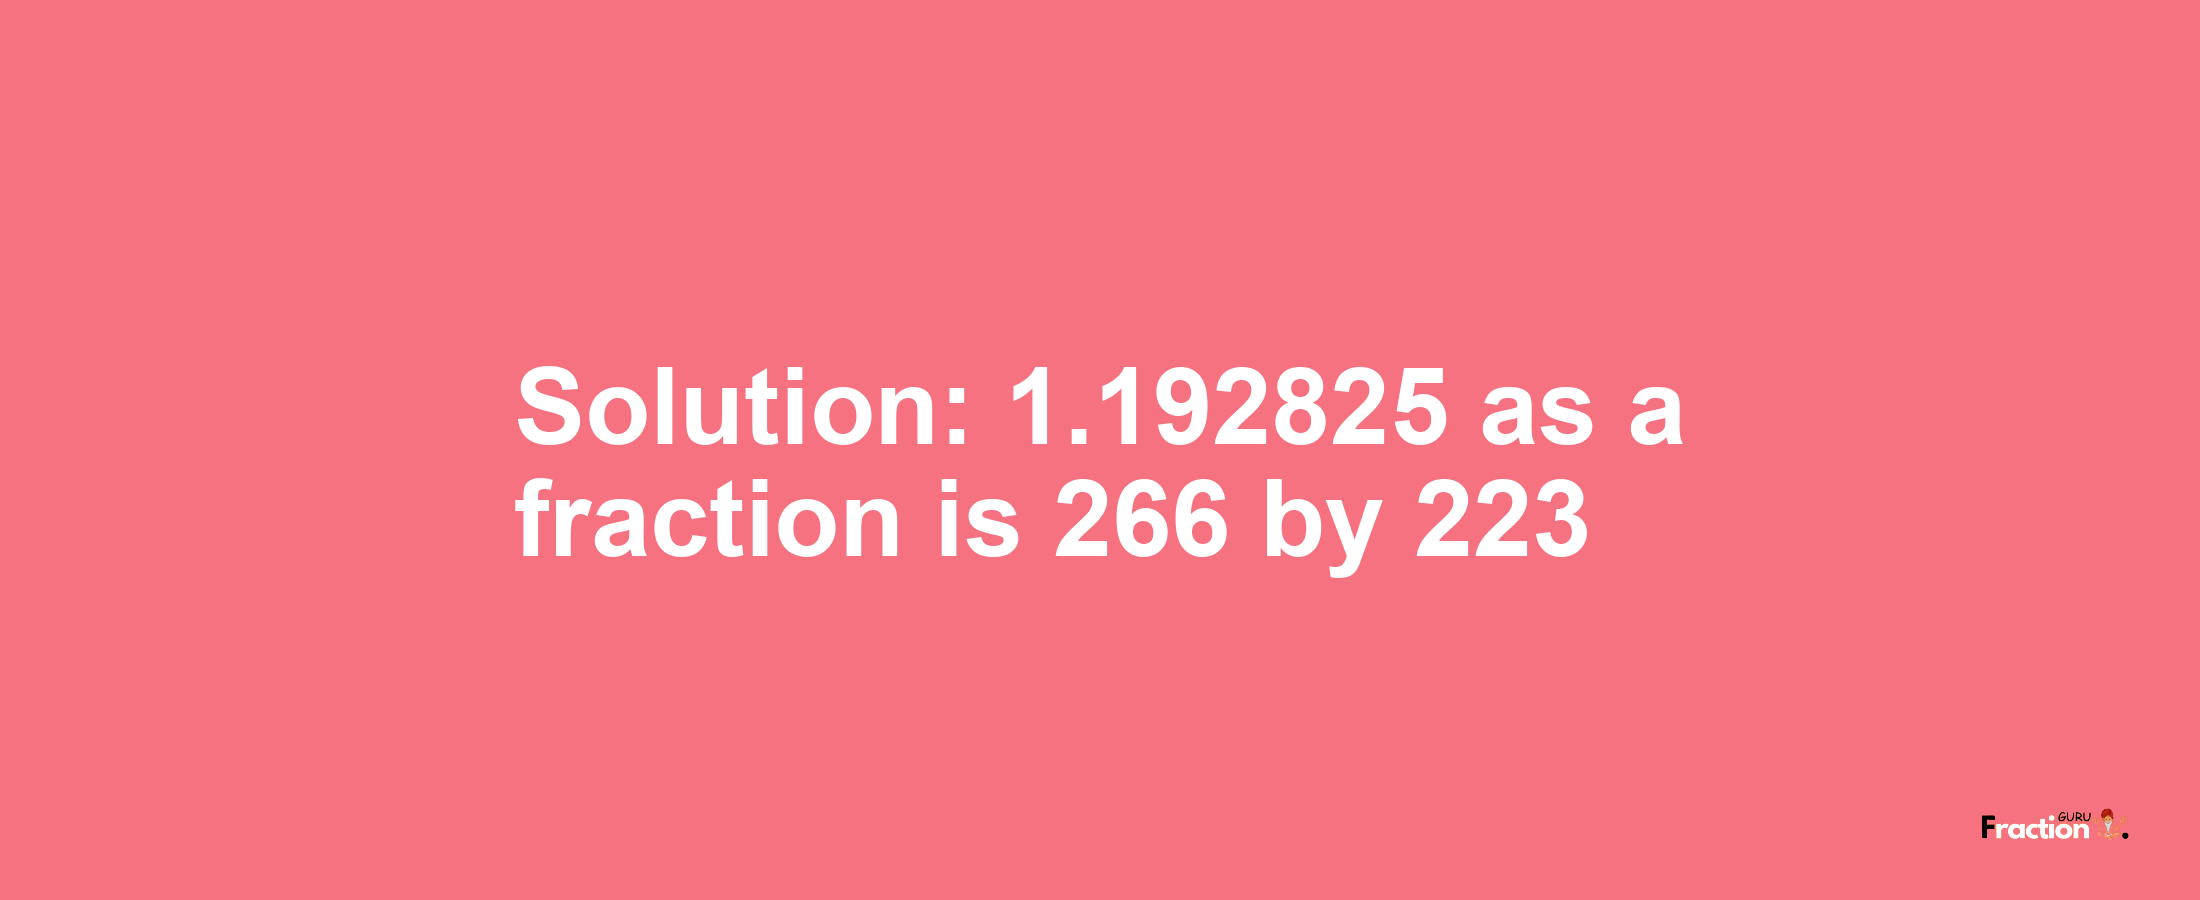 Solution:1.192825 as a fraction is 266/223